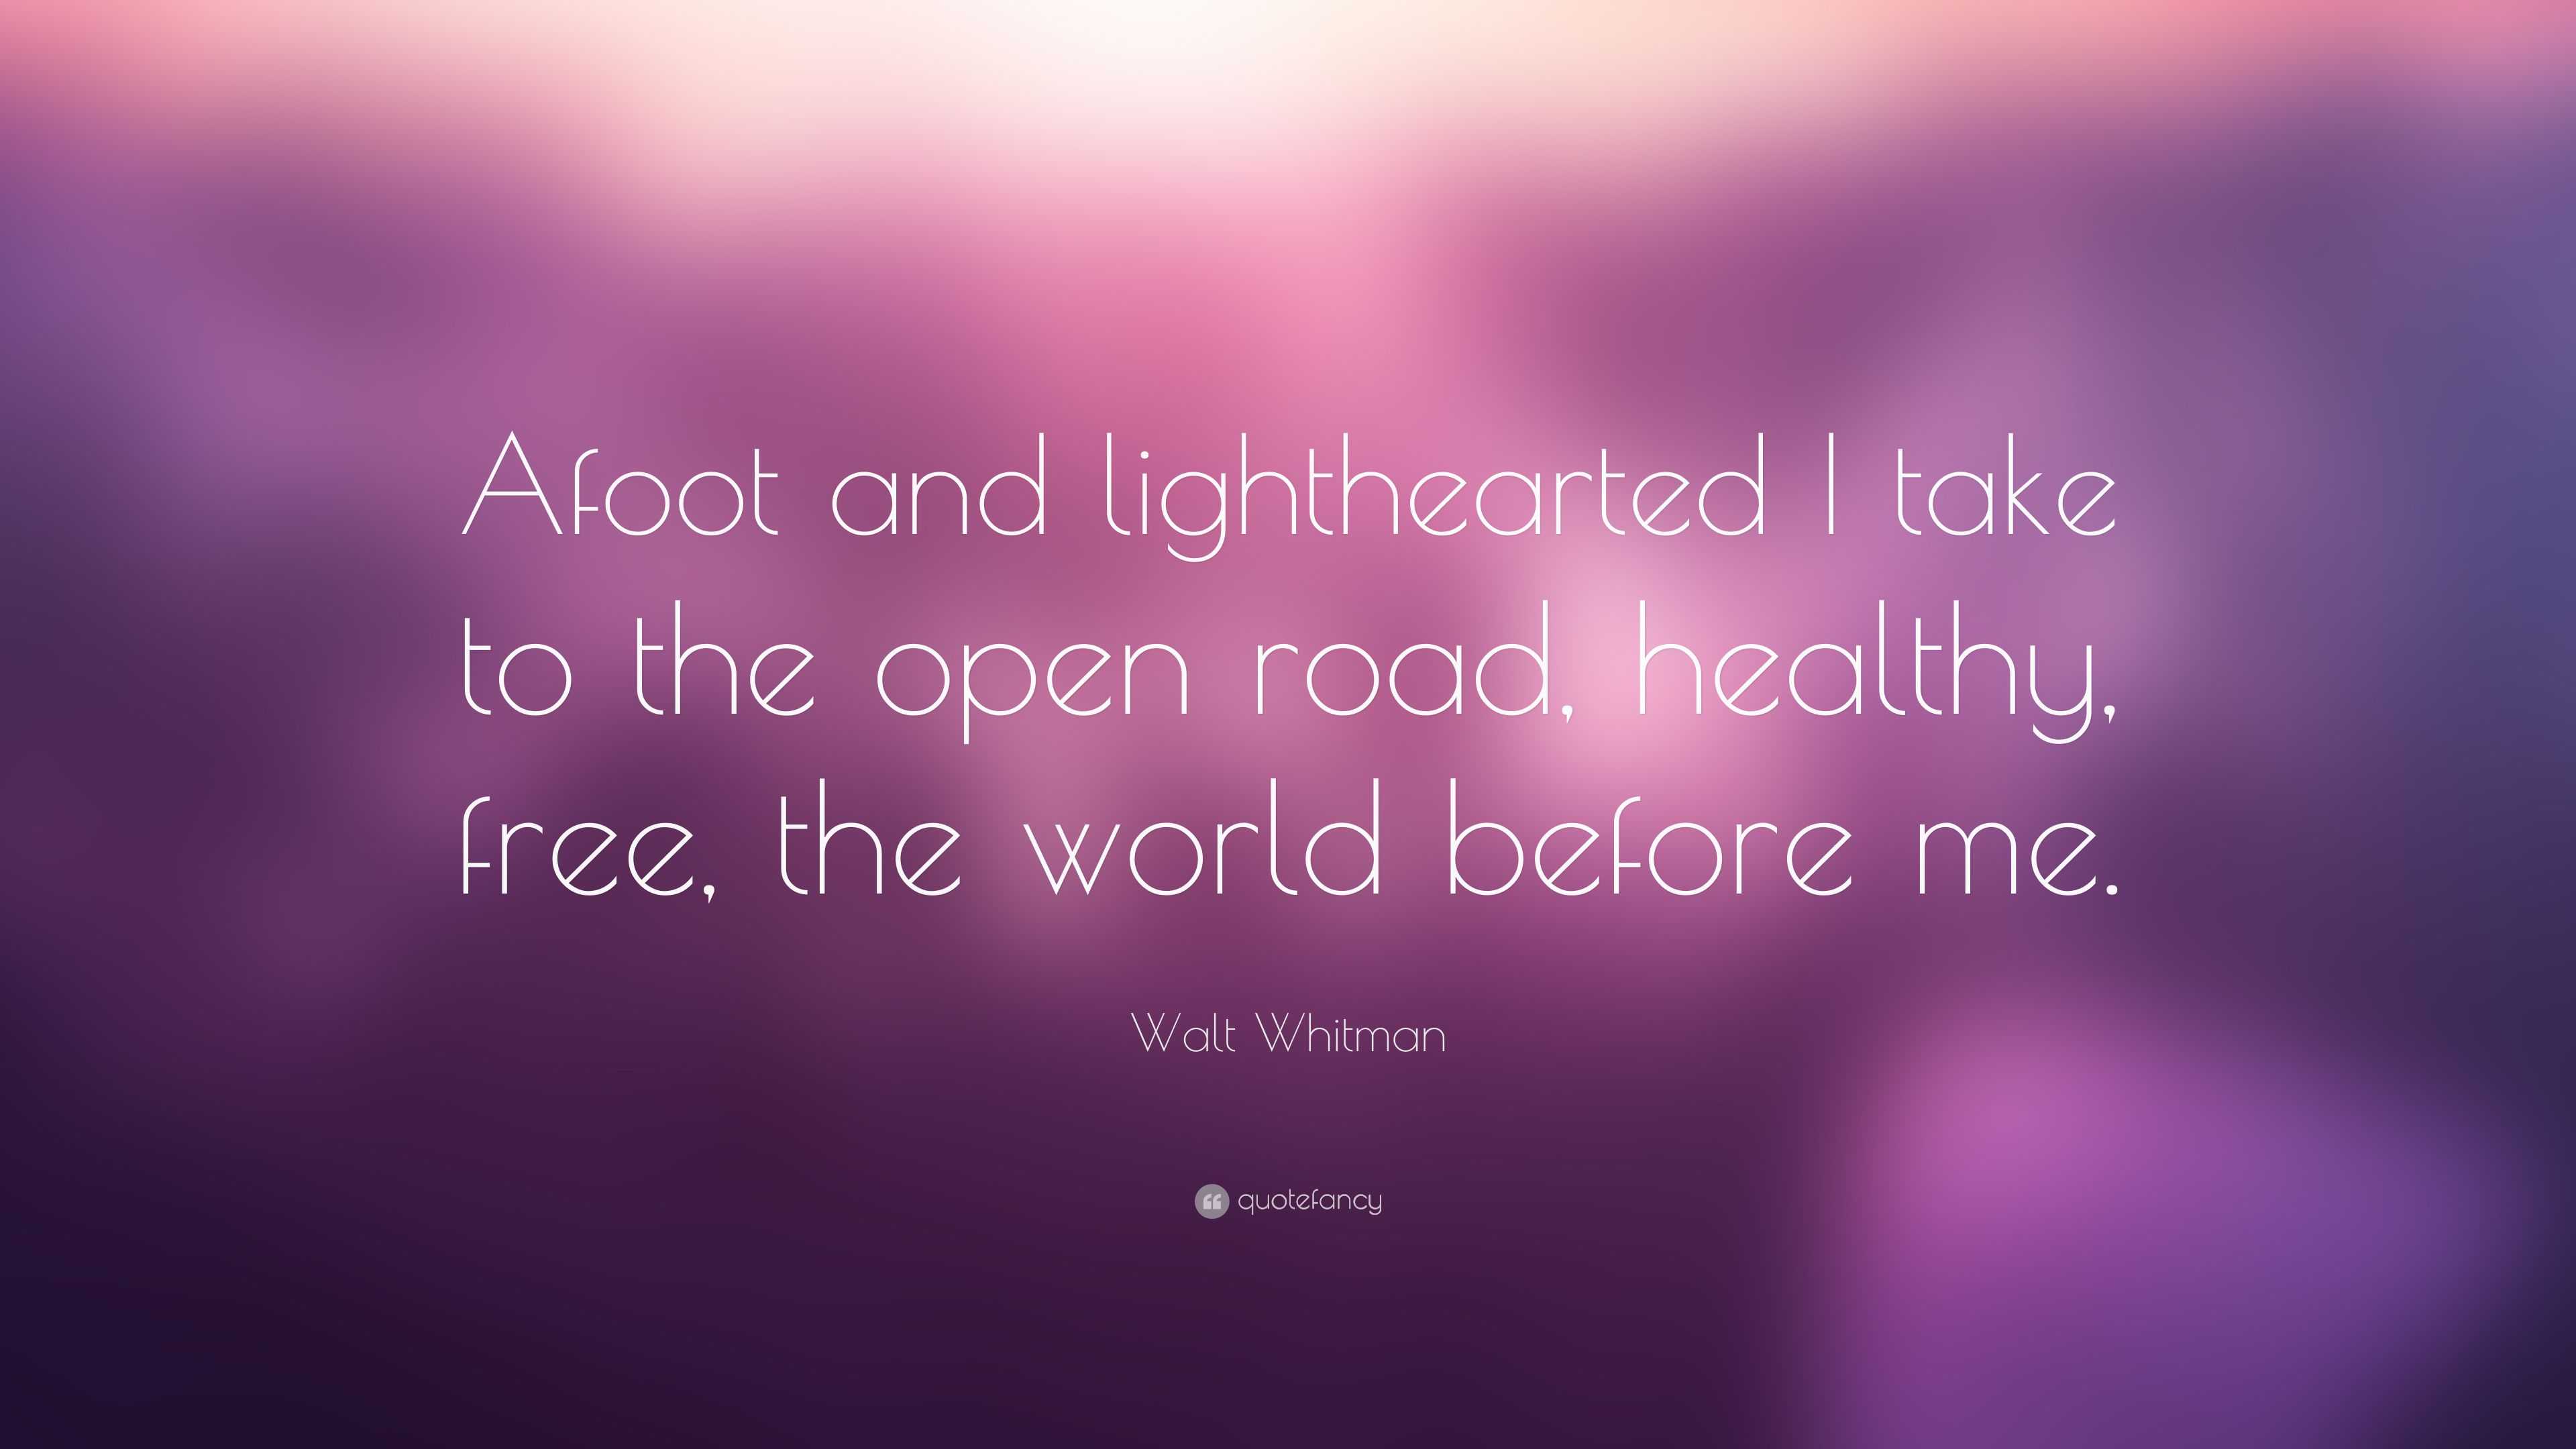 Walt Whitman Quote “Afoot and lighthearted I take to the open road healthy